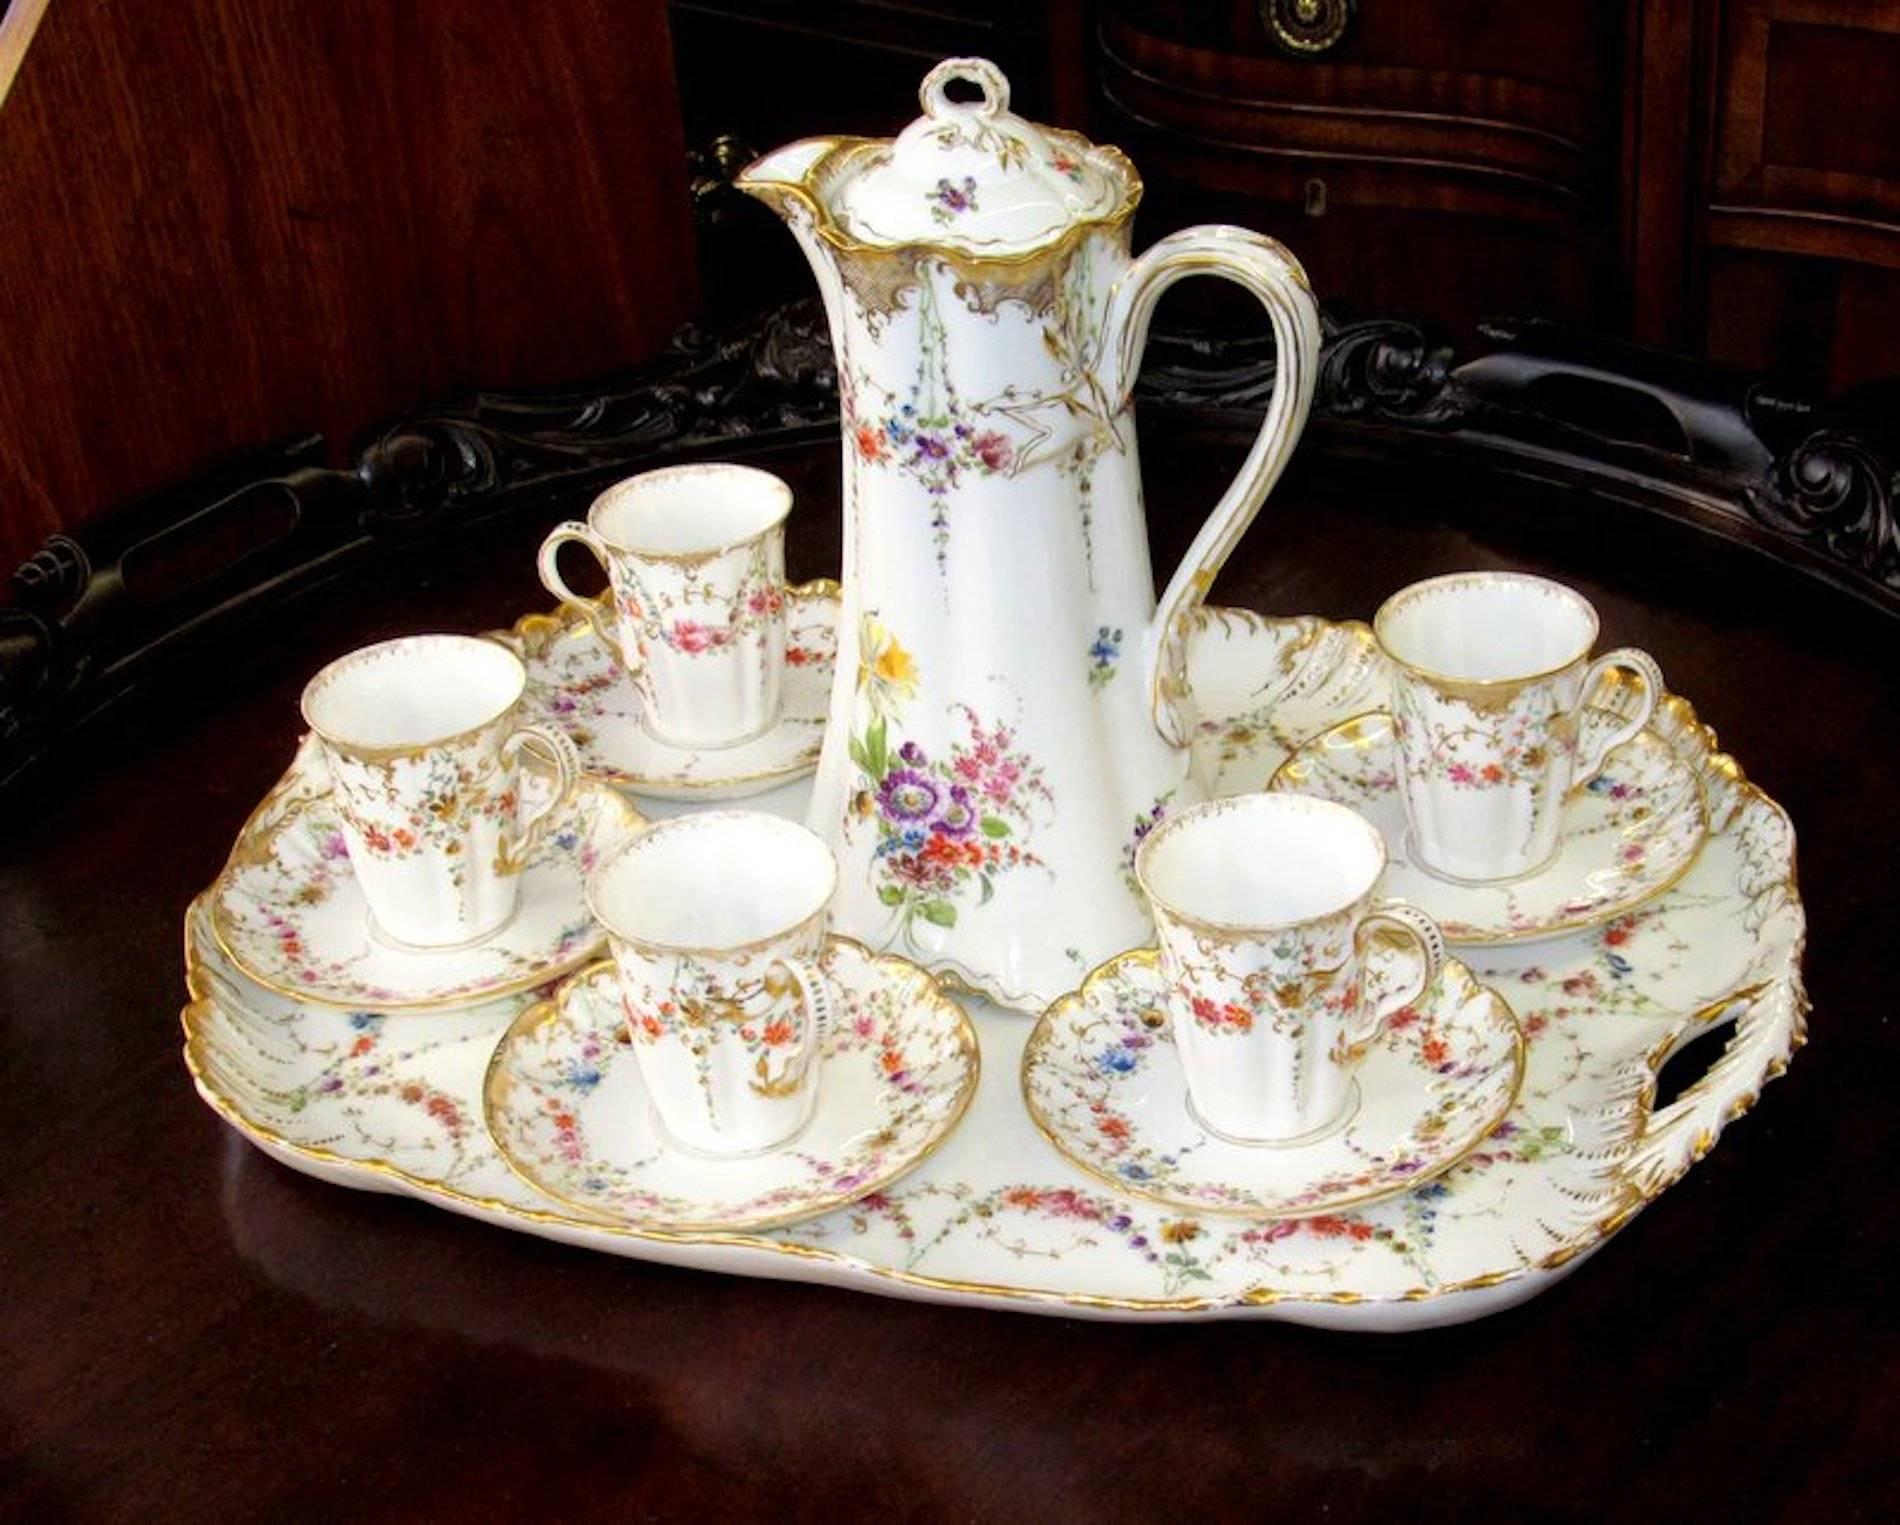 Fabulous quality antique French Haviland Limoges hand-painted porcelain chocolate set with rare cabaret tray, chocolate pot and five cups and saucers.

Please note exceptional hand-painted floral garlands and sprays with initials by artist